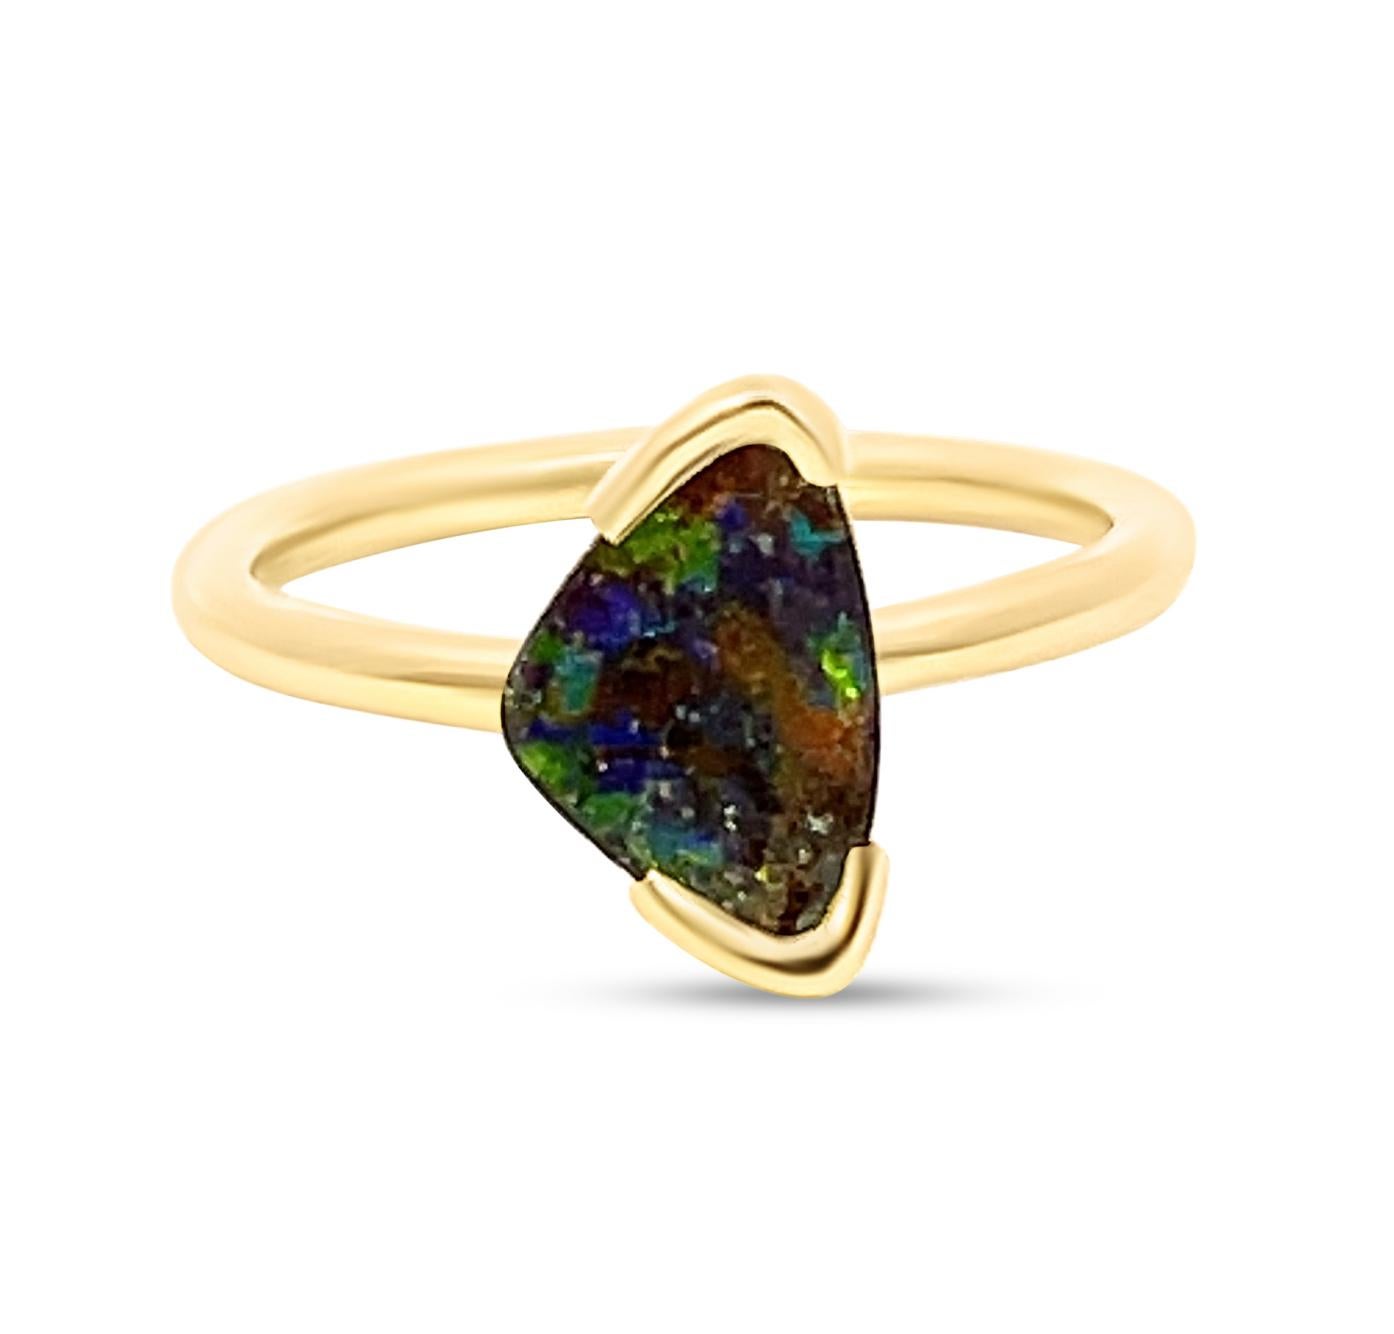 Symbolising wisdom, the ‘Sophie’ engagement opal ring features an elegant boulder opal (1.38ct) ethically sourced from Winton mines in Queensland, Australia. The hues of yellow, juicy green, and navy blue in the gemstone’s play-of-colour express the